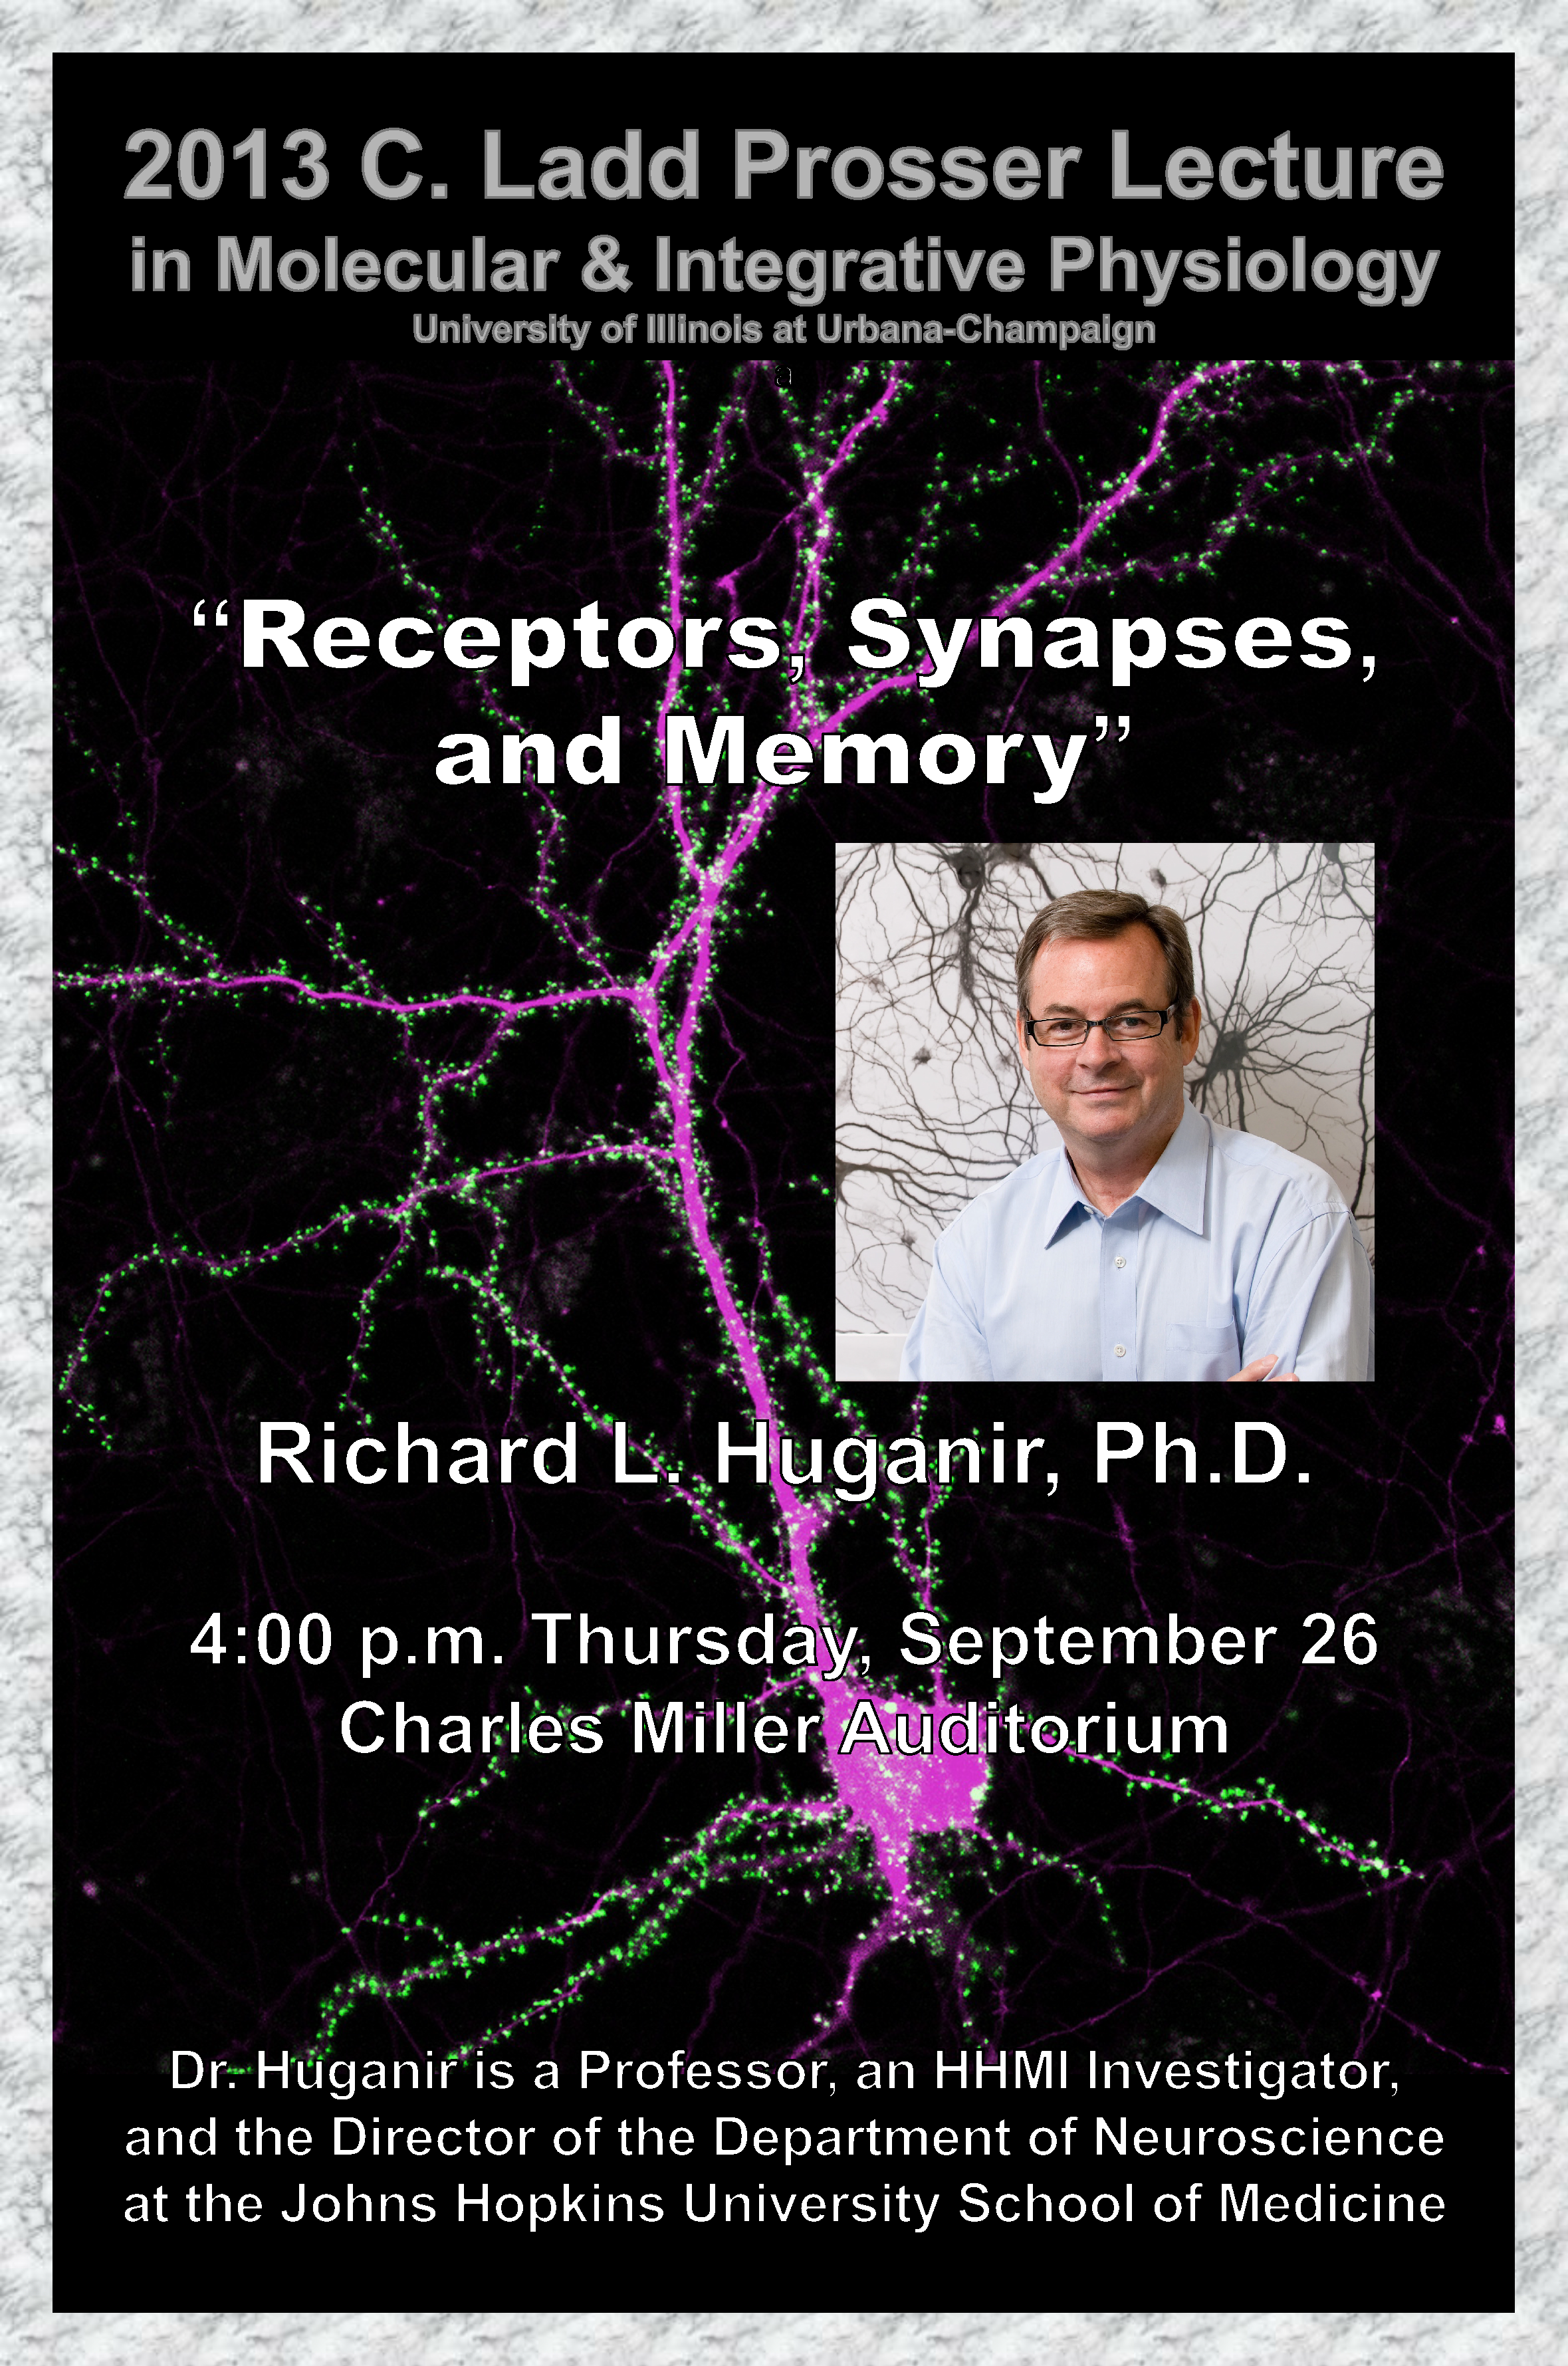 Poster advertising headshot and lecture by Richard Huganir